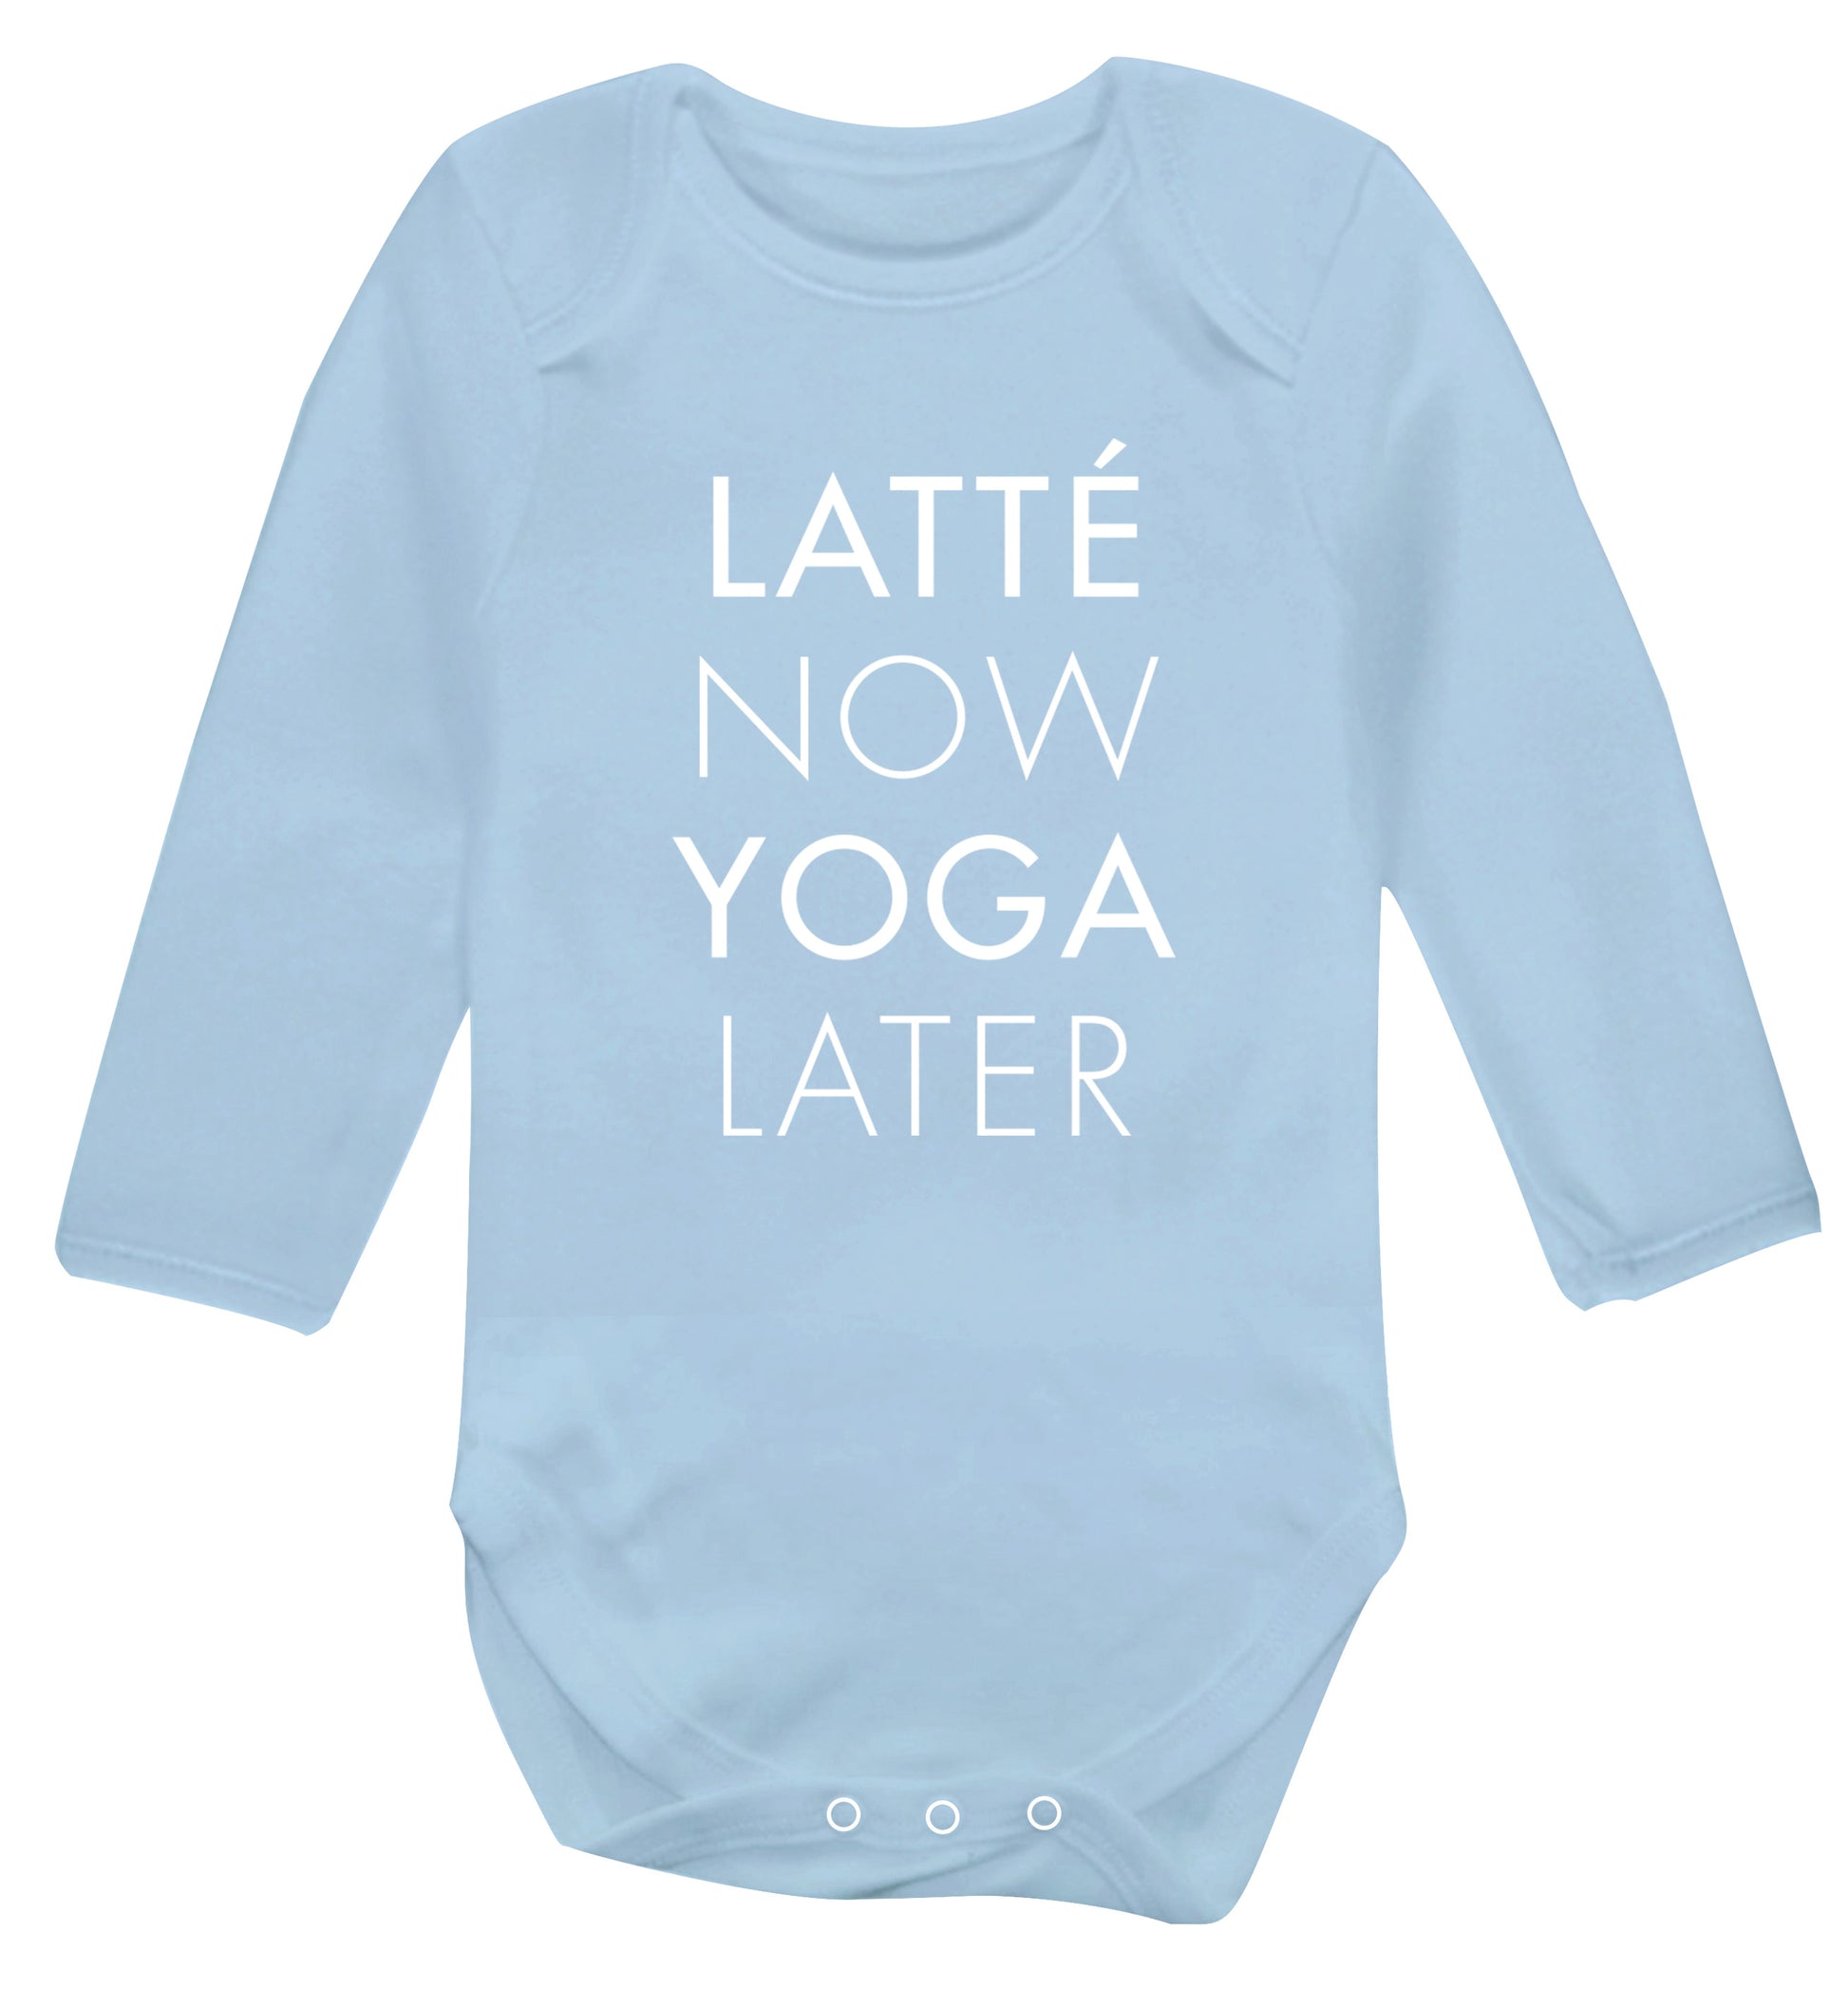 Latte now yoga later Baby Vest long sleeved pale blue 6-12 months